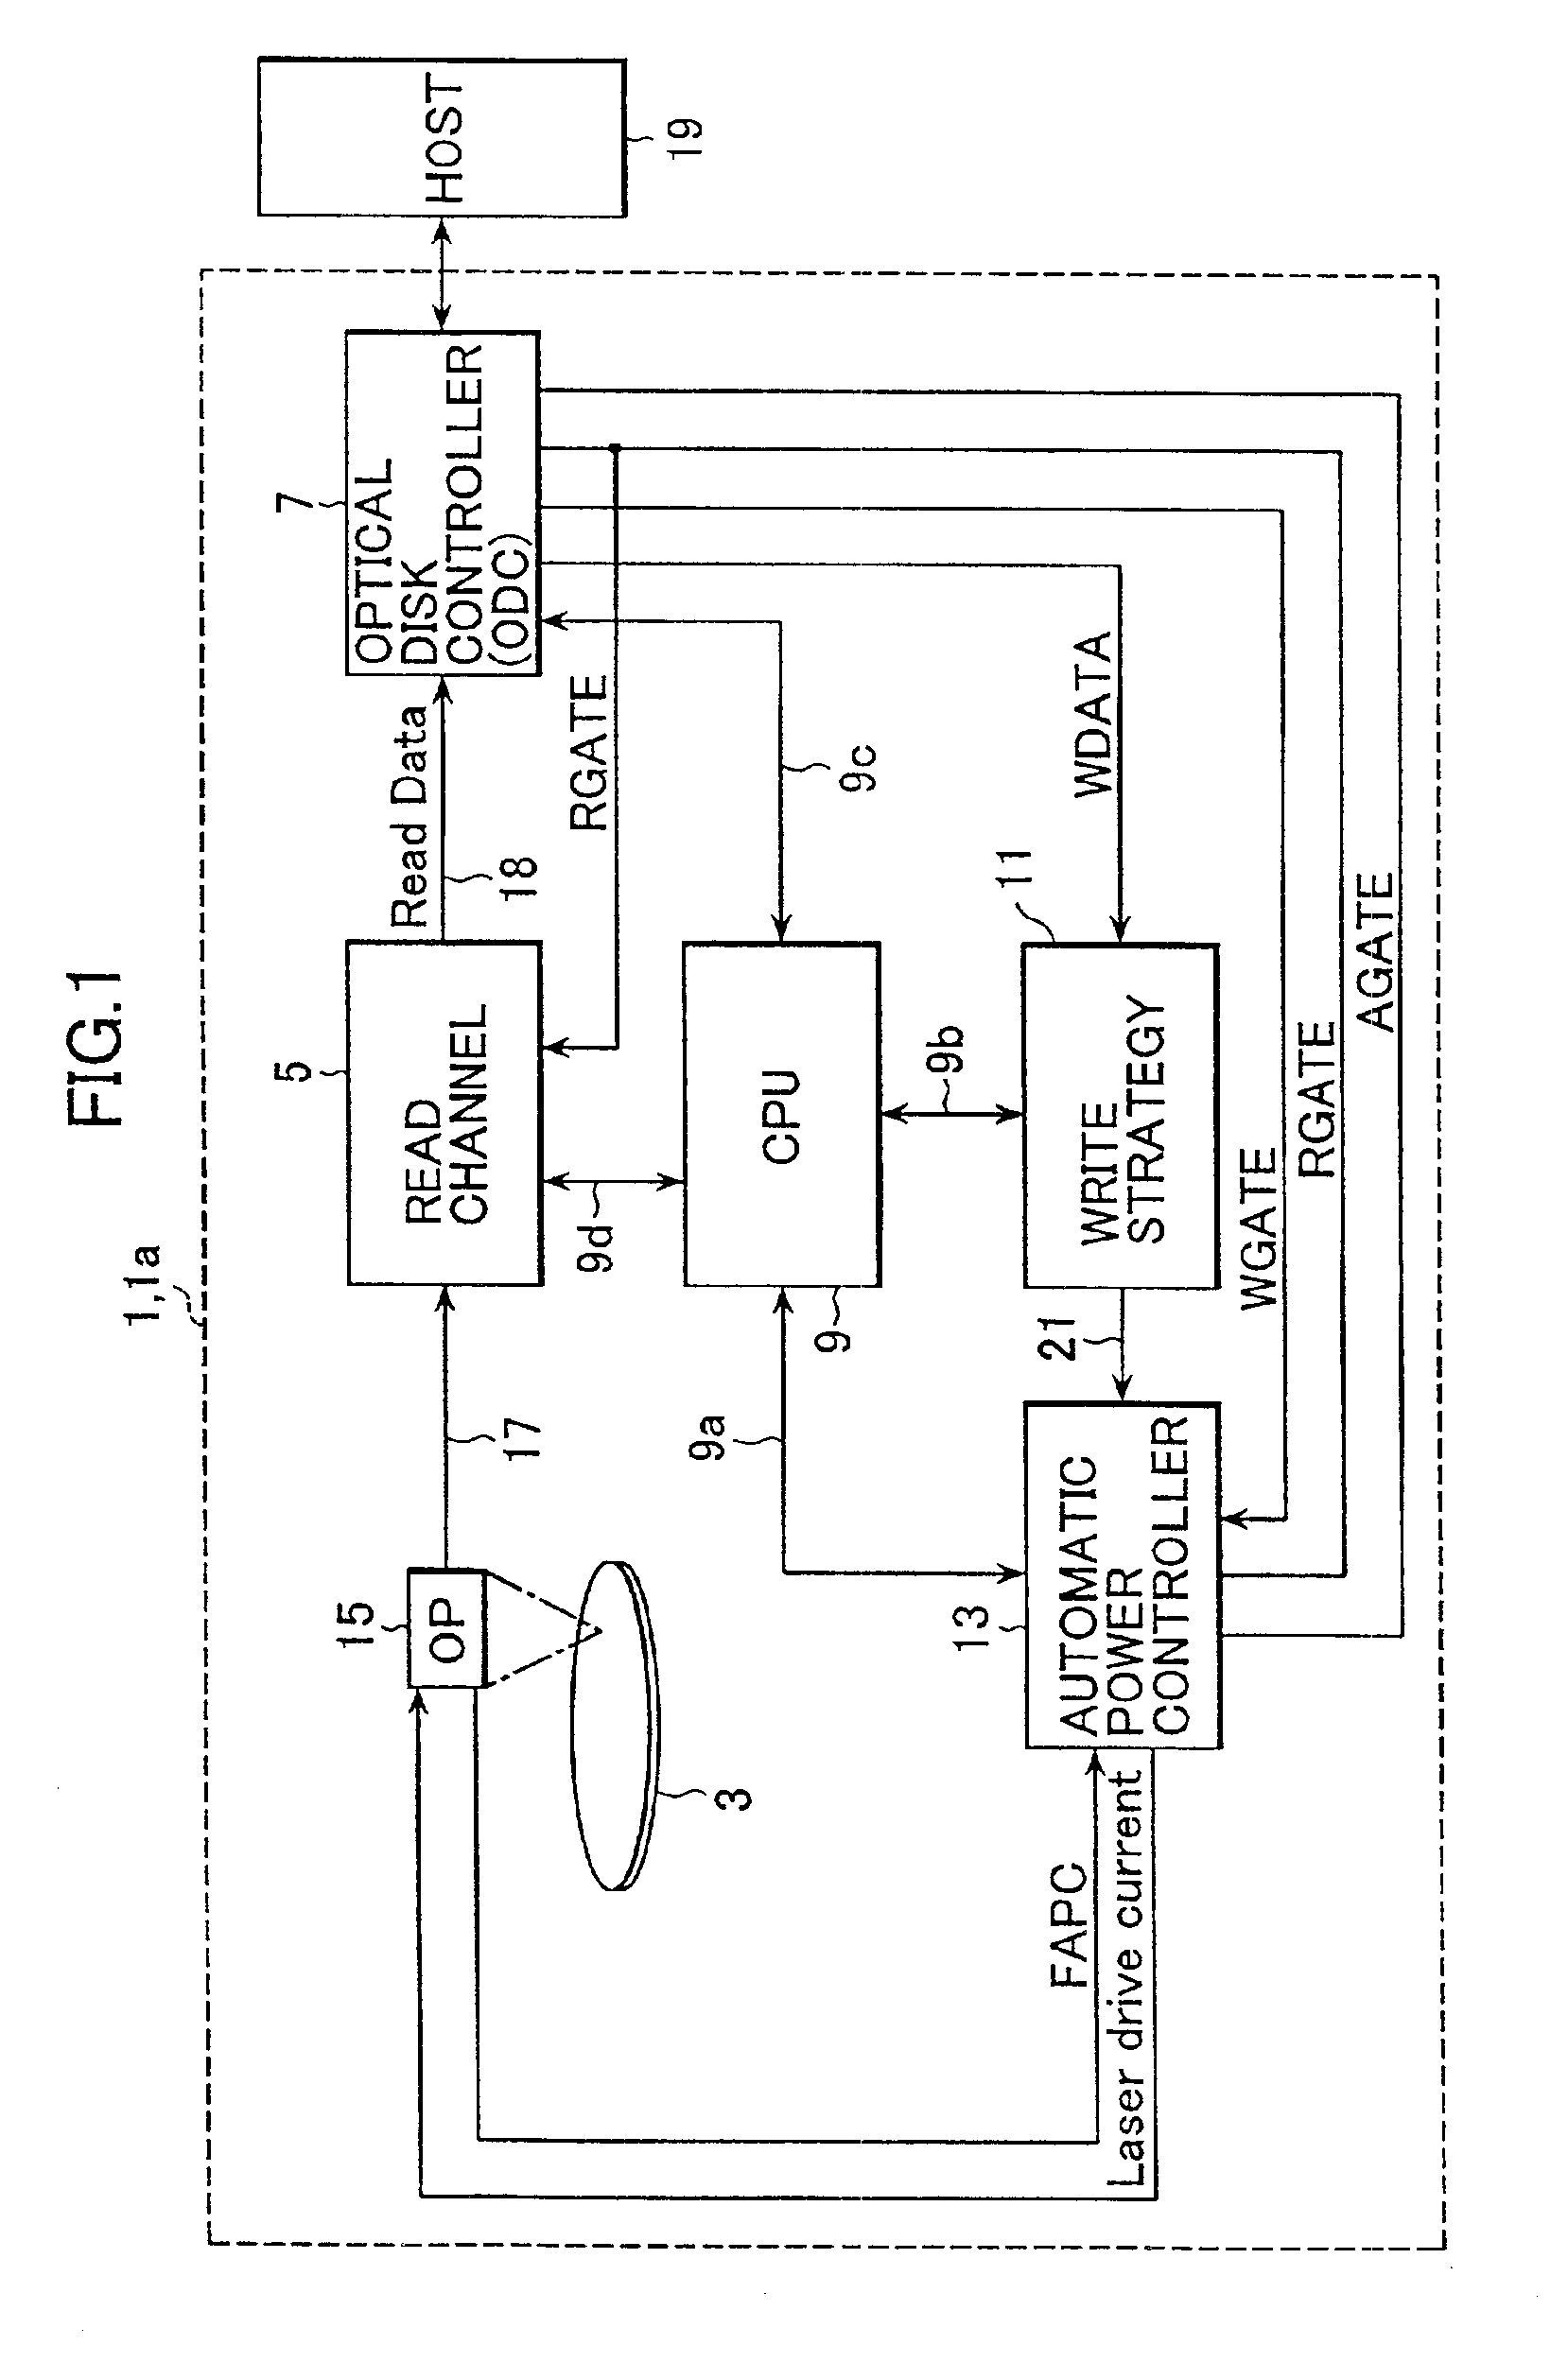 Optical disk apparatus and method for recording data by utilizing an overwrite technique or a two-path write technique